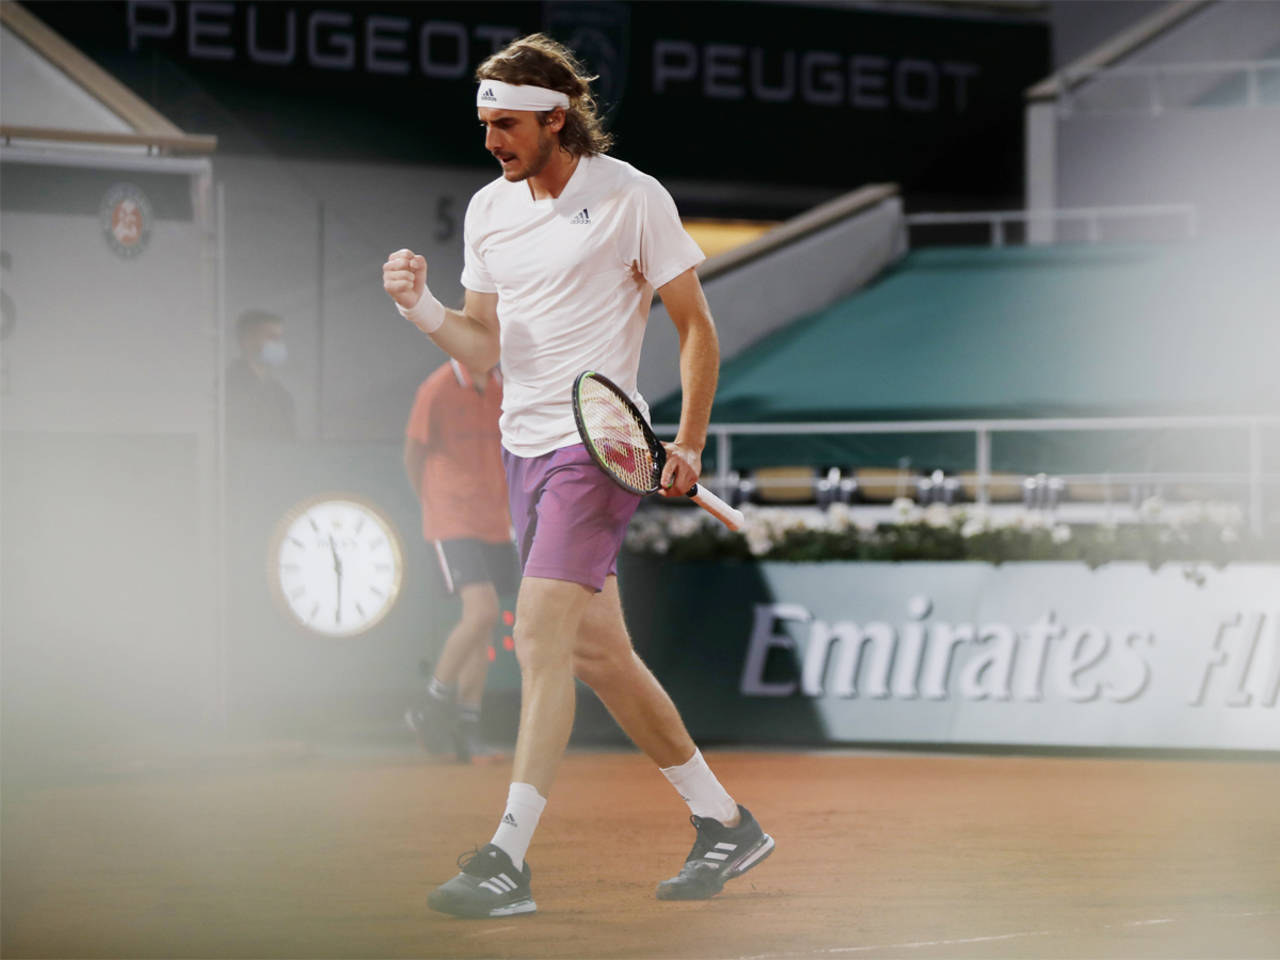 French Open 2021 Steely Stefanos Tsitsipas keeps his cool to beat John Isner in four sets Tennis News